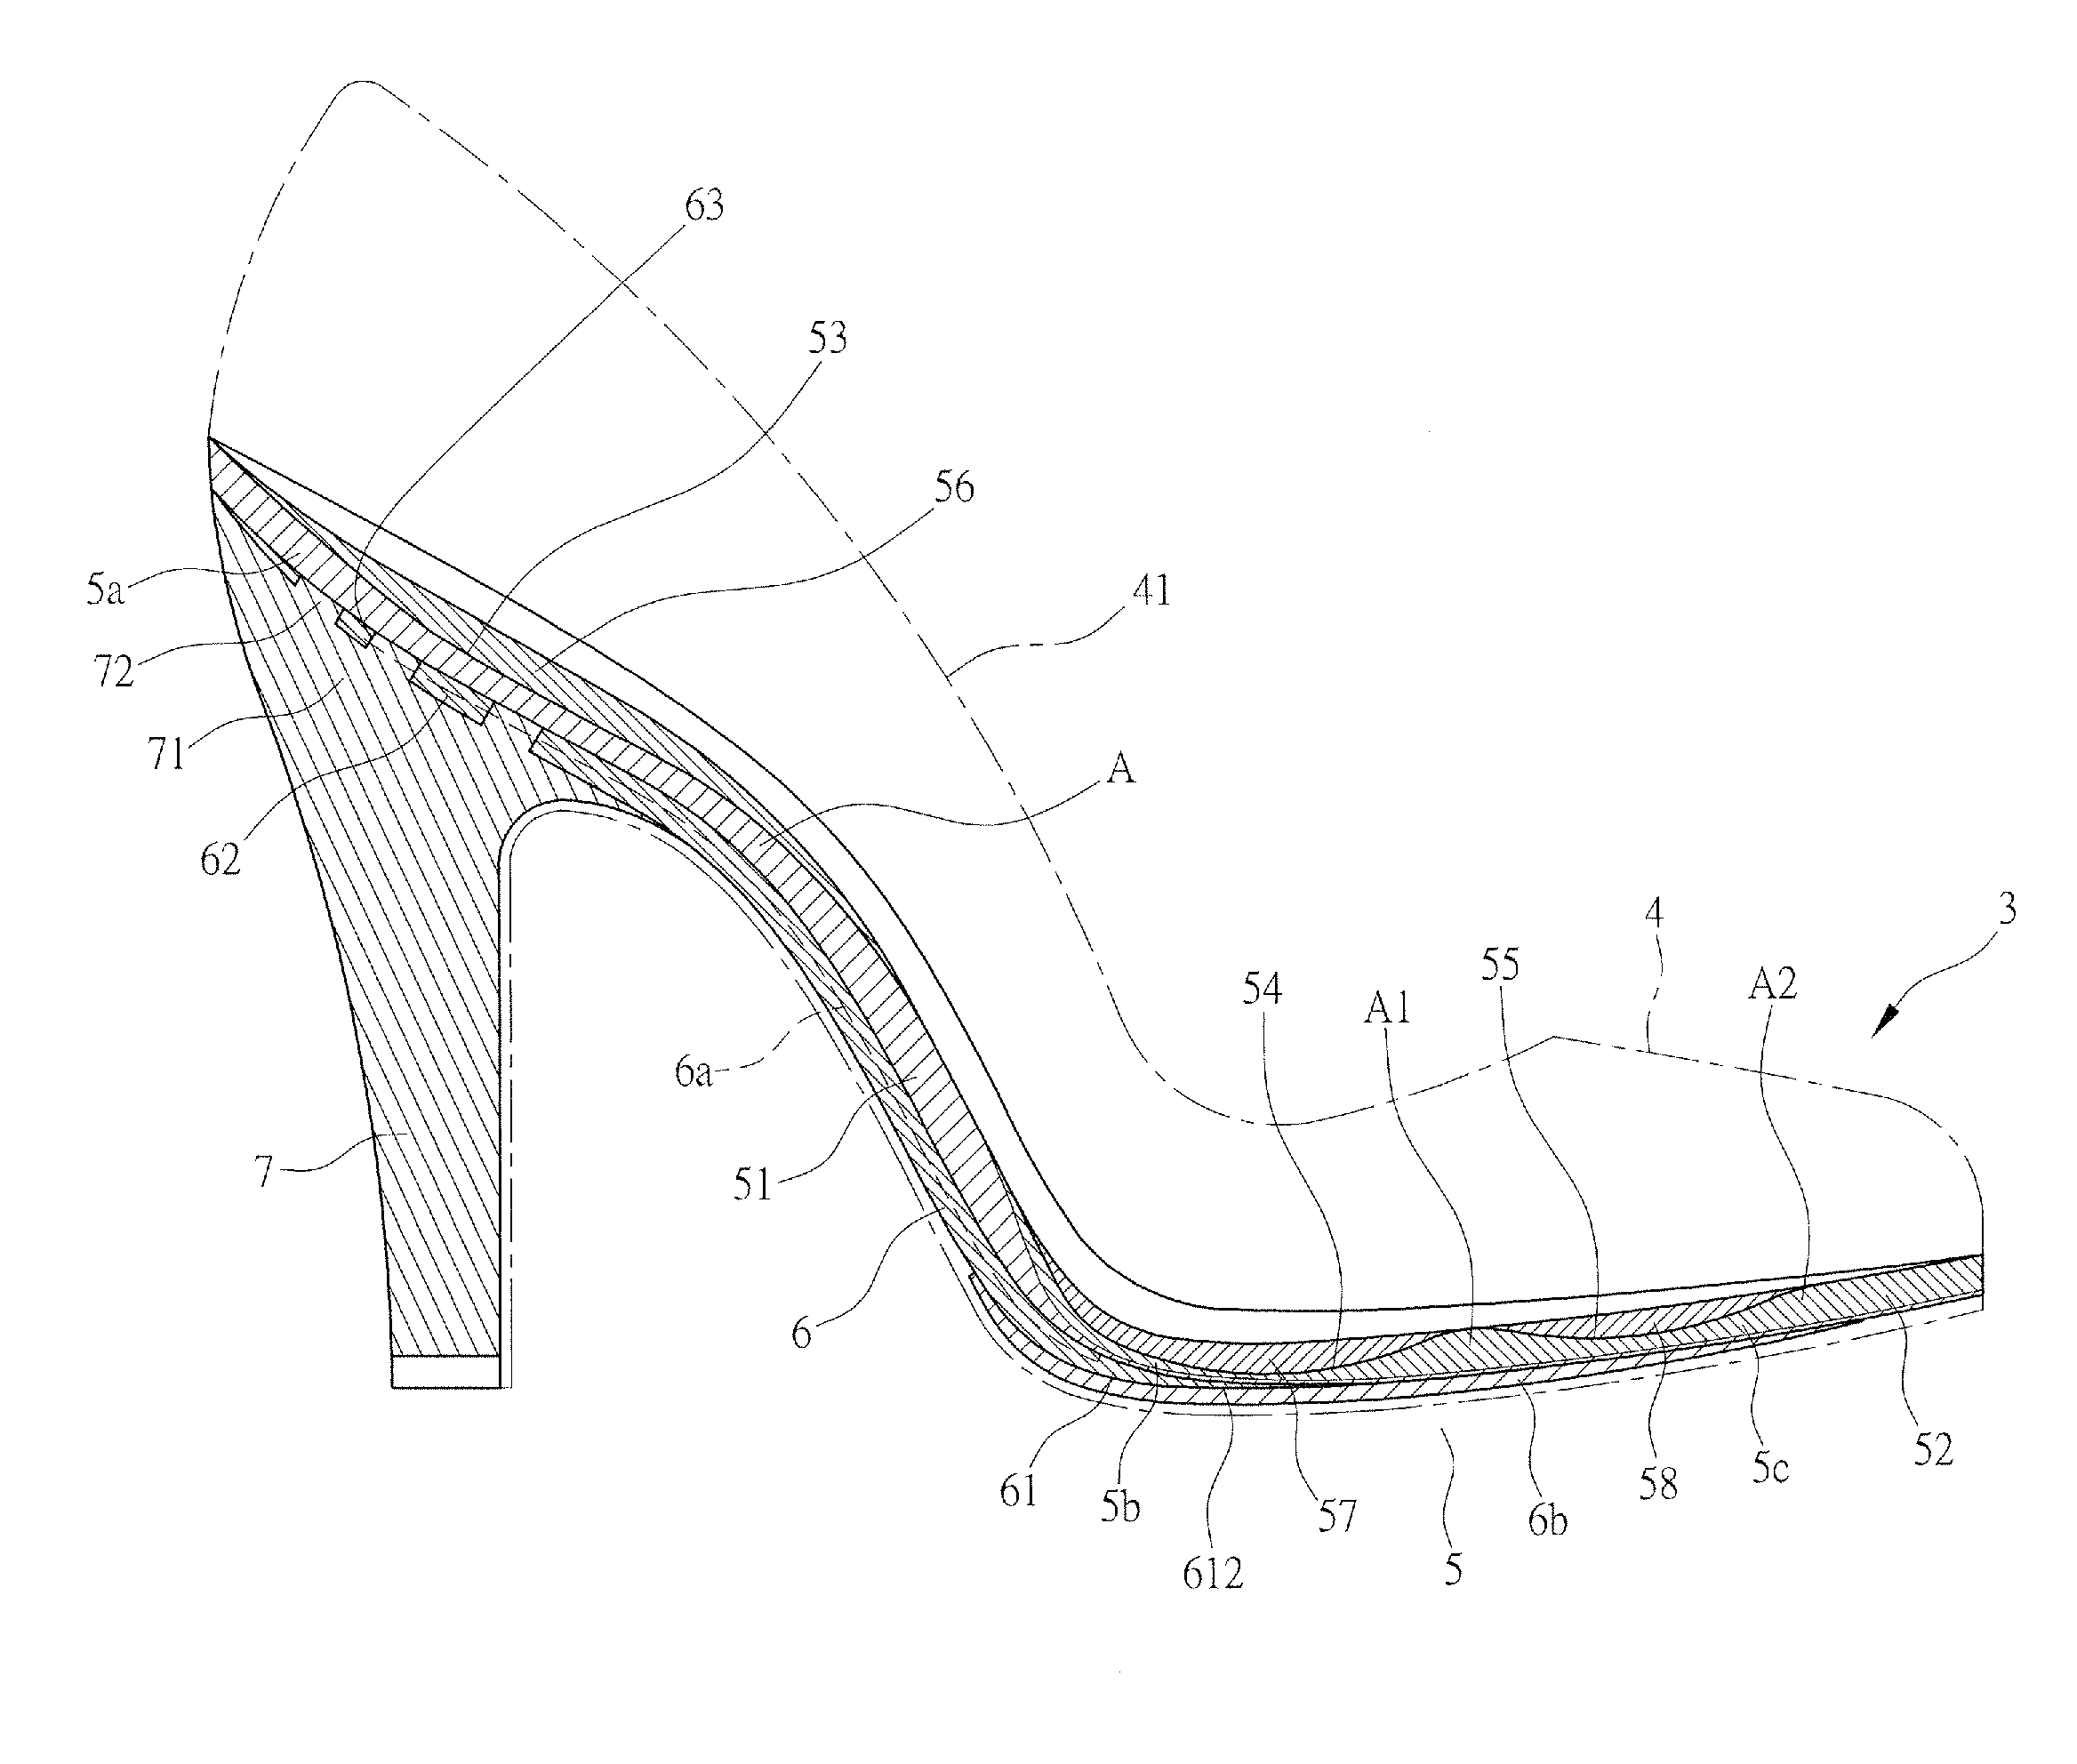 Structure of High-Heeled Shoe